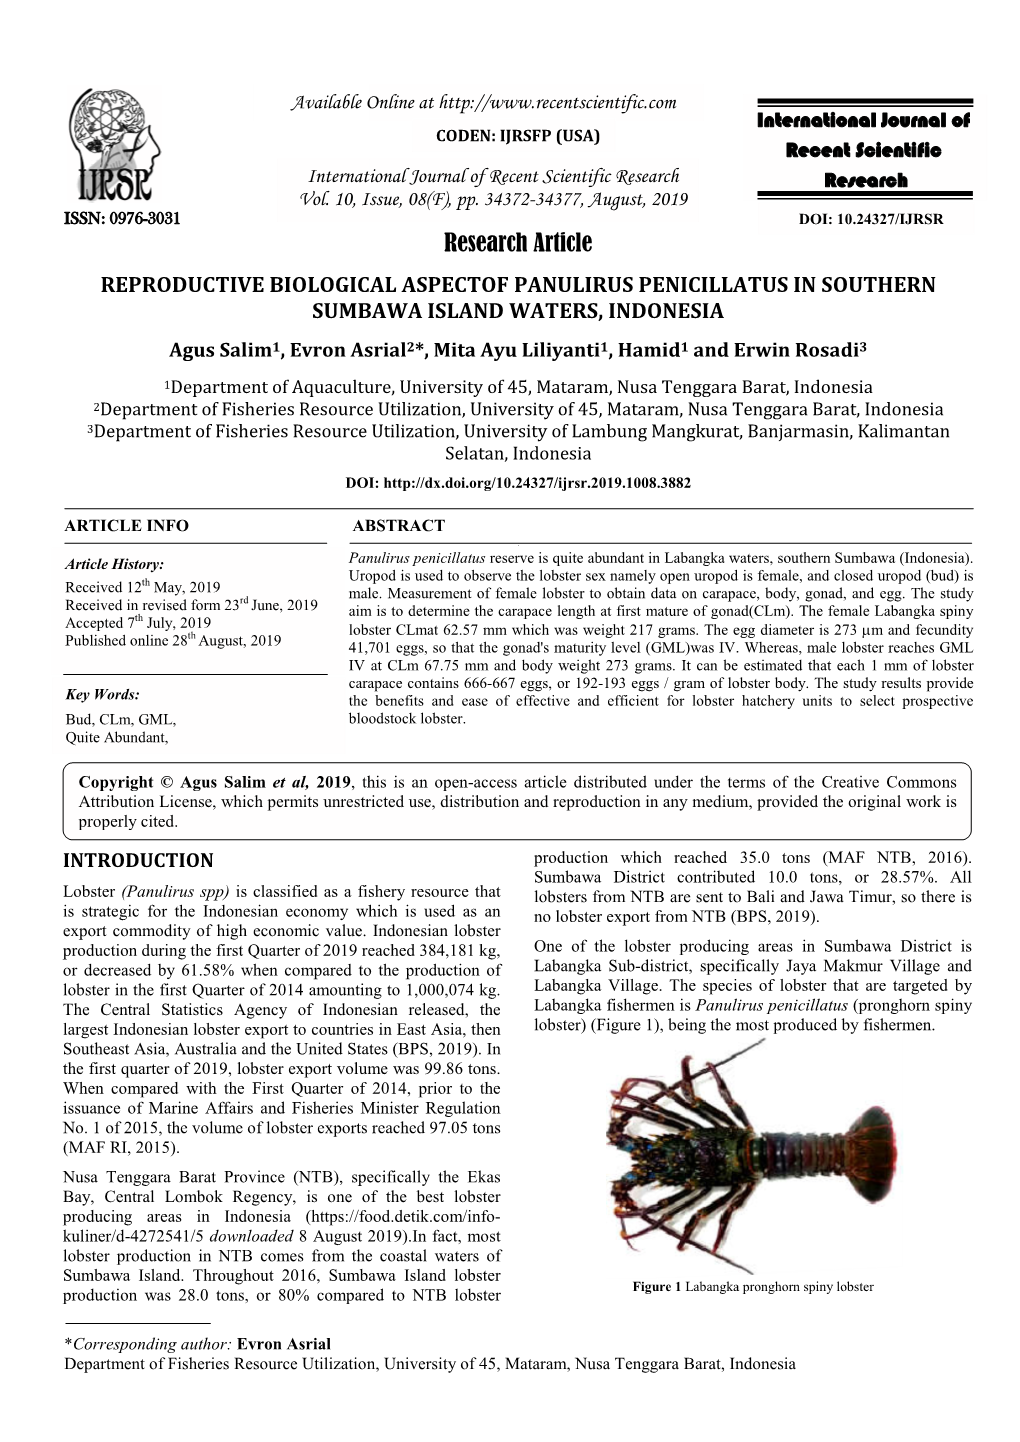 Downloaded 8 August 2019).In Fact, Most Lobster Production in NTB Comes from the Coastal Waters of Sumbawa Island